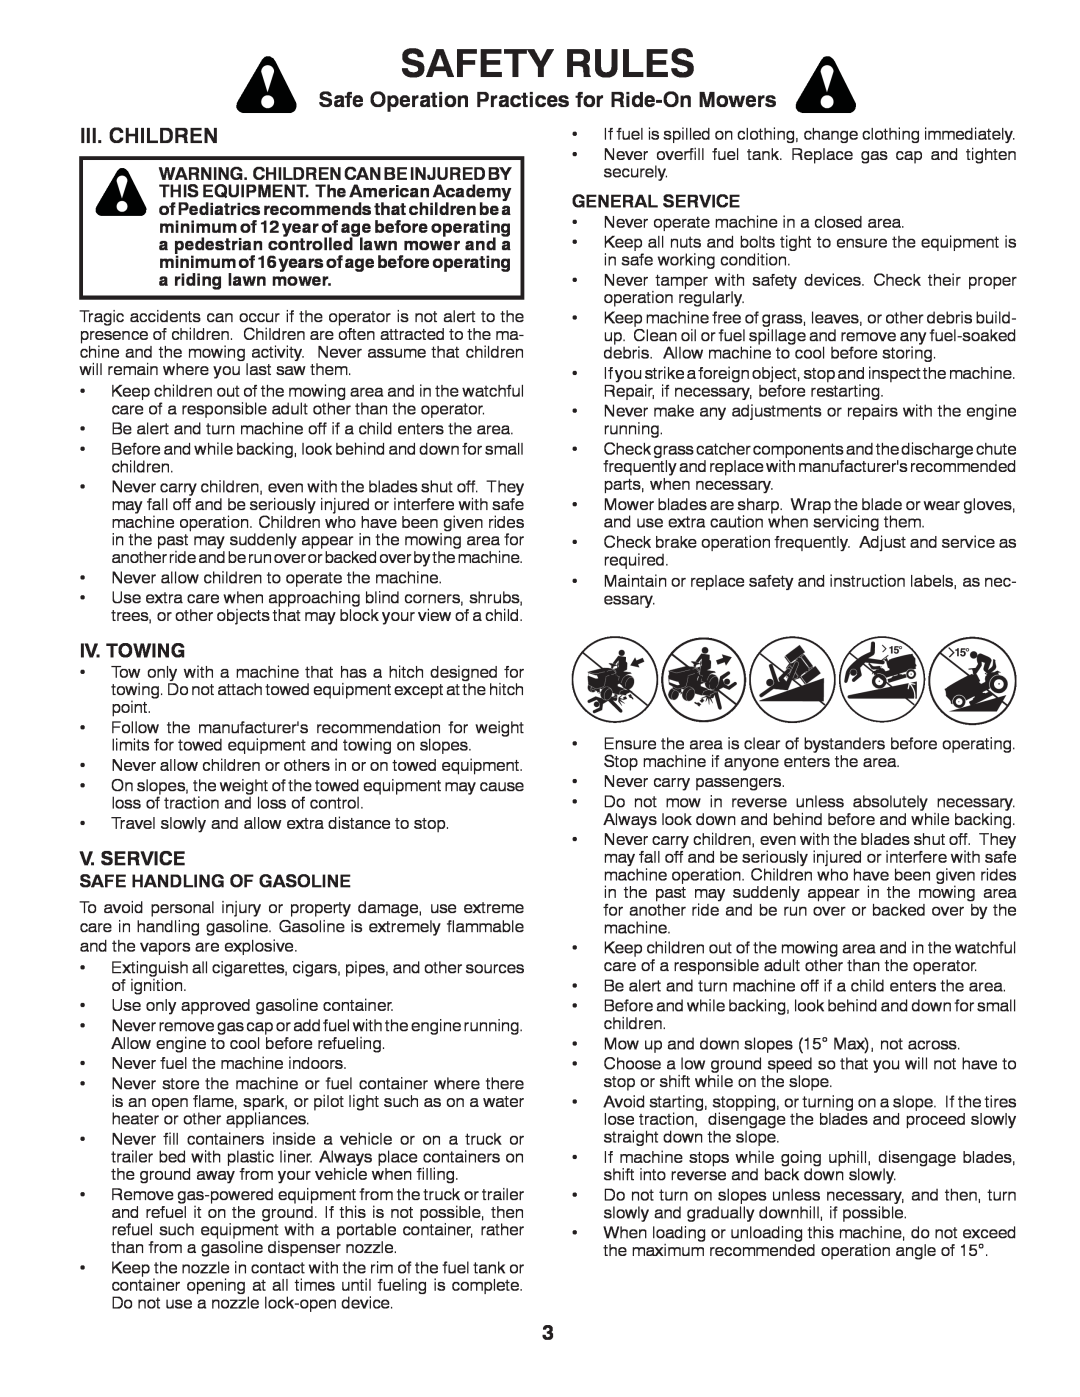 Poulan PO12538LT warranty Iii. Children, Safety Rules, Safe Operation Practices for Ride-OnMowers, Iv. Towing, V. Service 